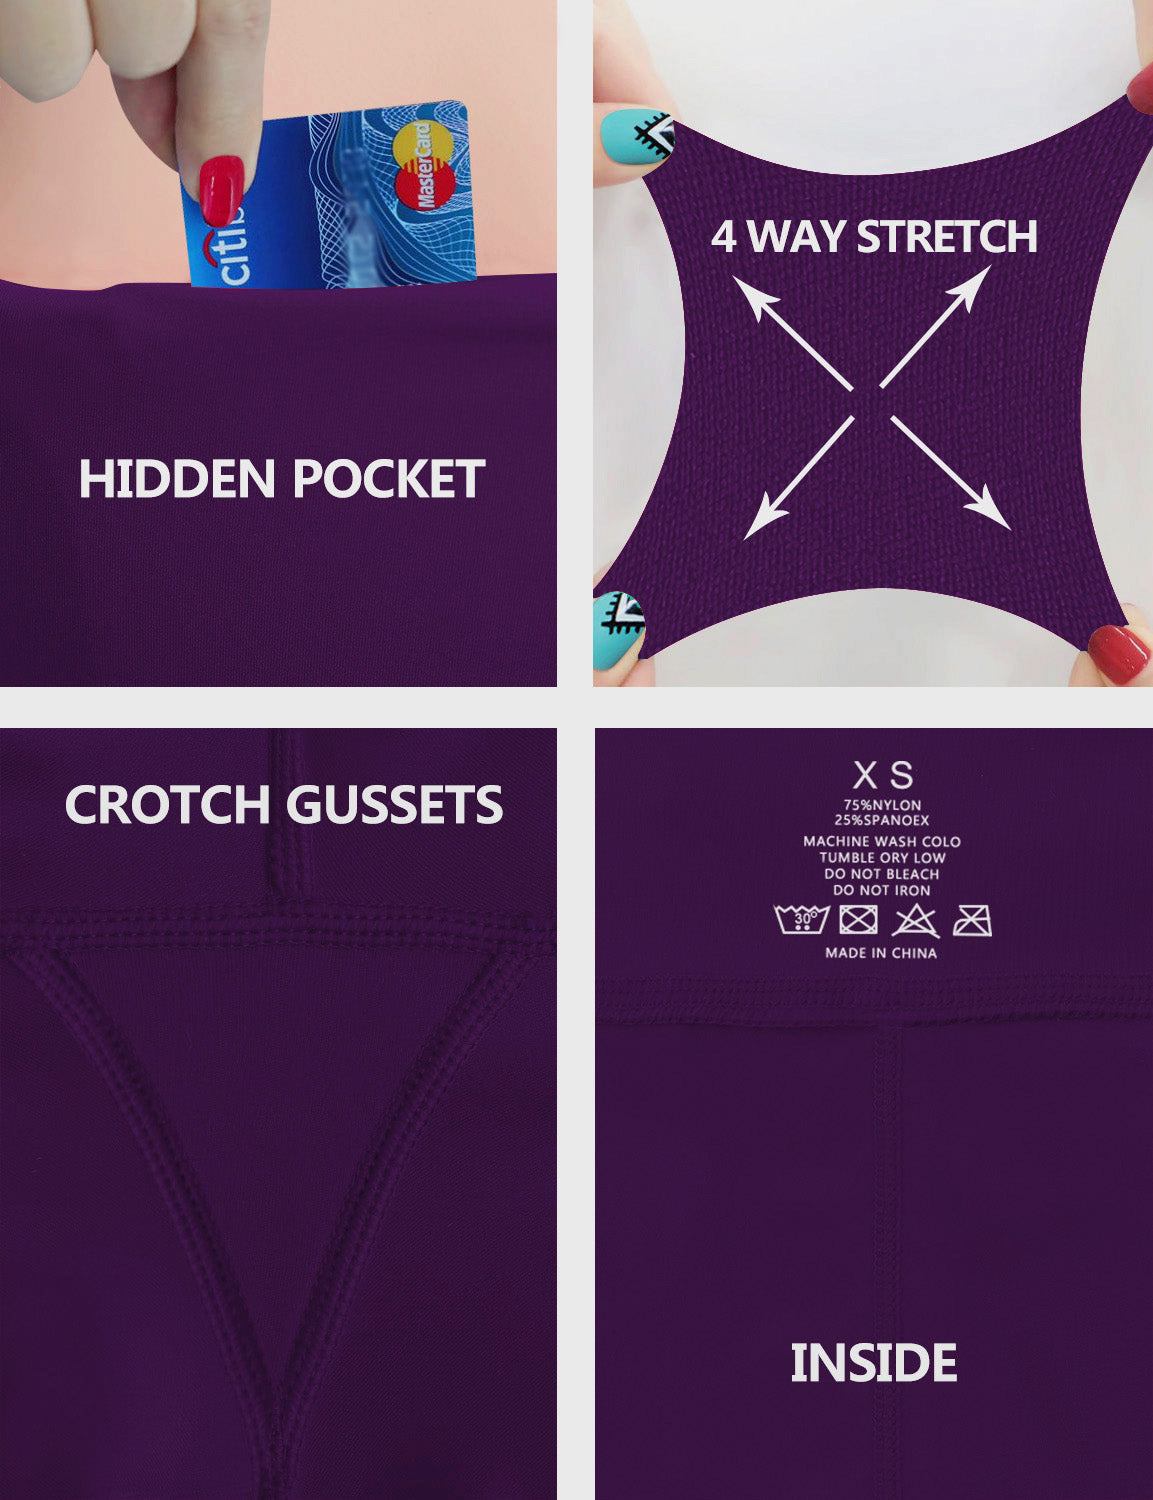 4 Pockets Bootcut Leggings eggplantpurple 75%Nylon/25%Spandex Fabric doesn't attract lint easily 4-way stretch No see-through Moisture-wicking Inner pocket Four lengths